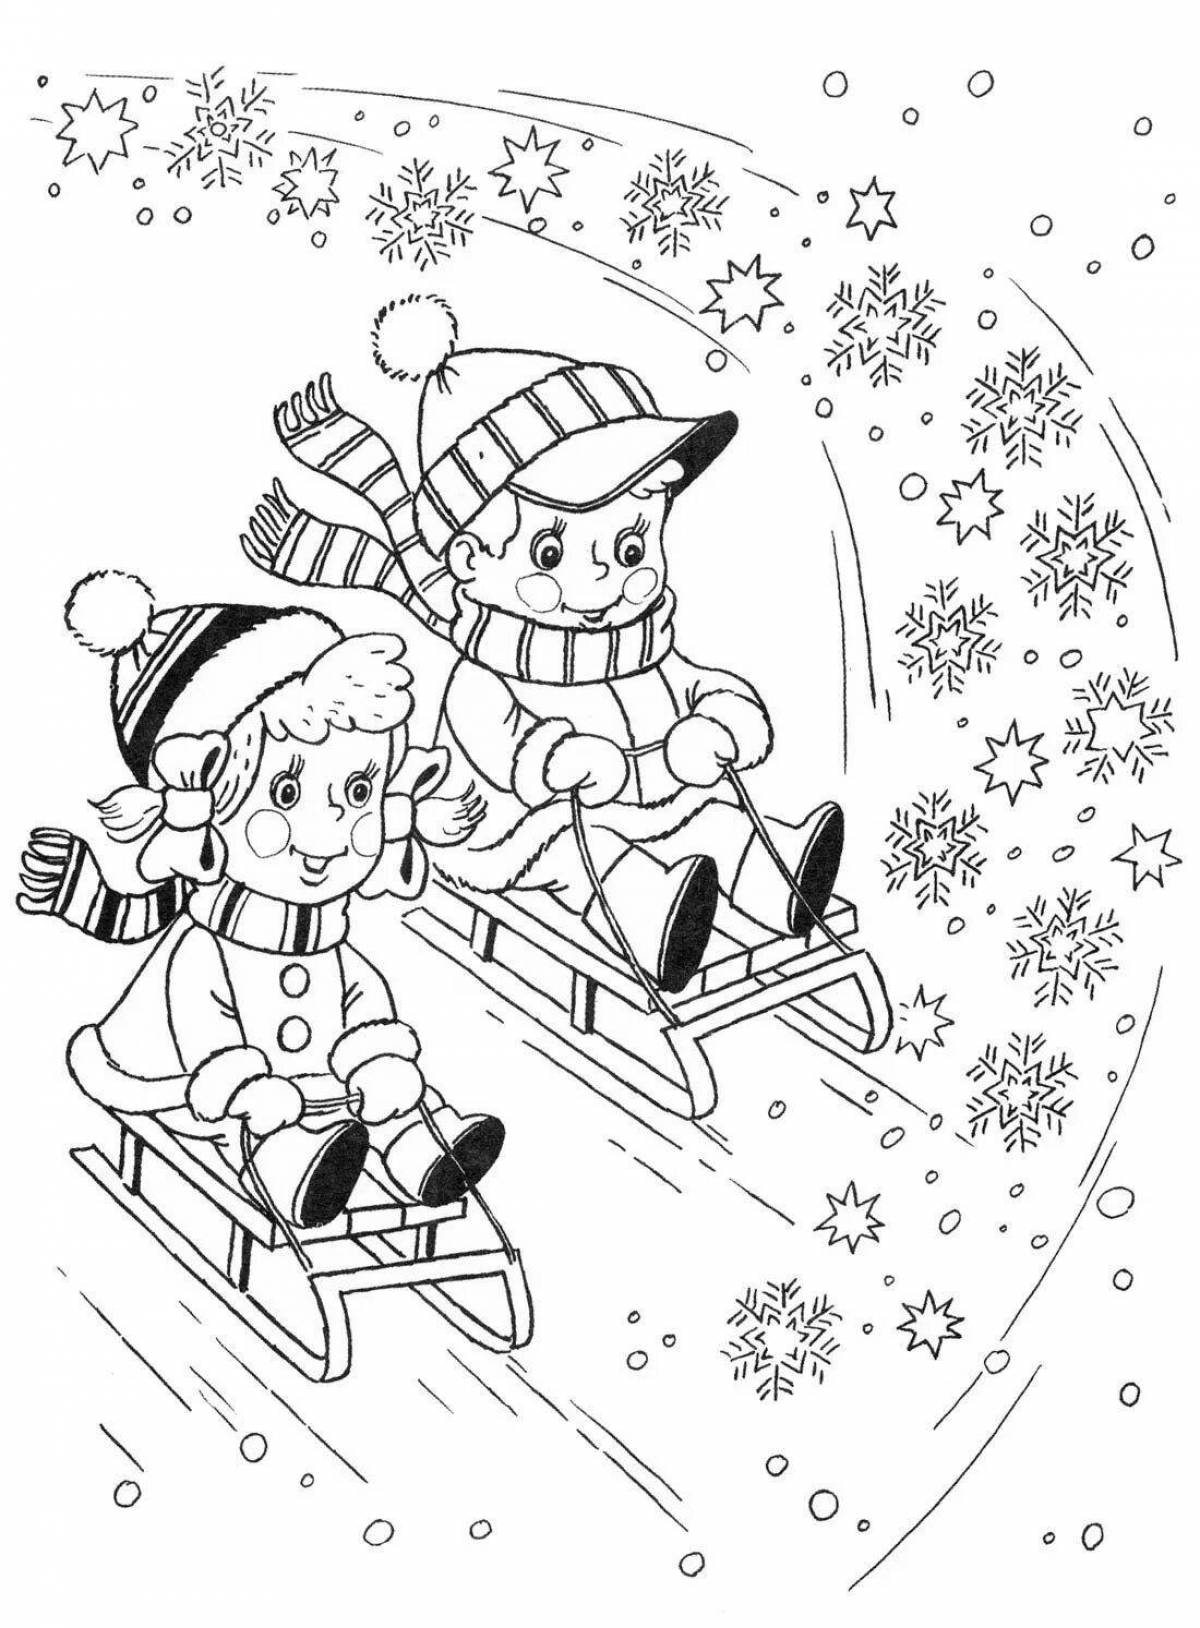 Coloring page funny snowman on a sled